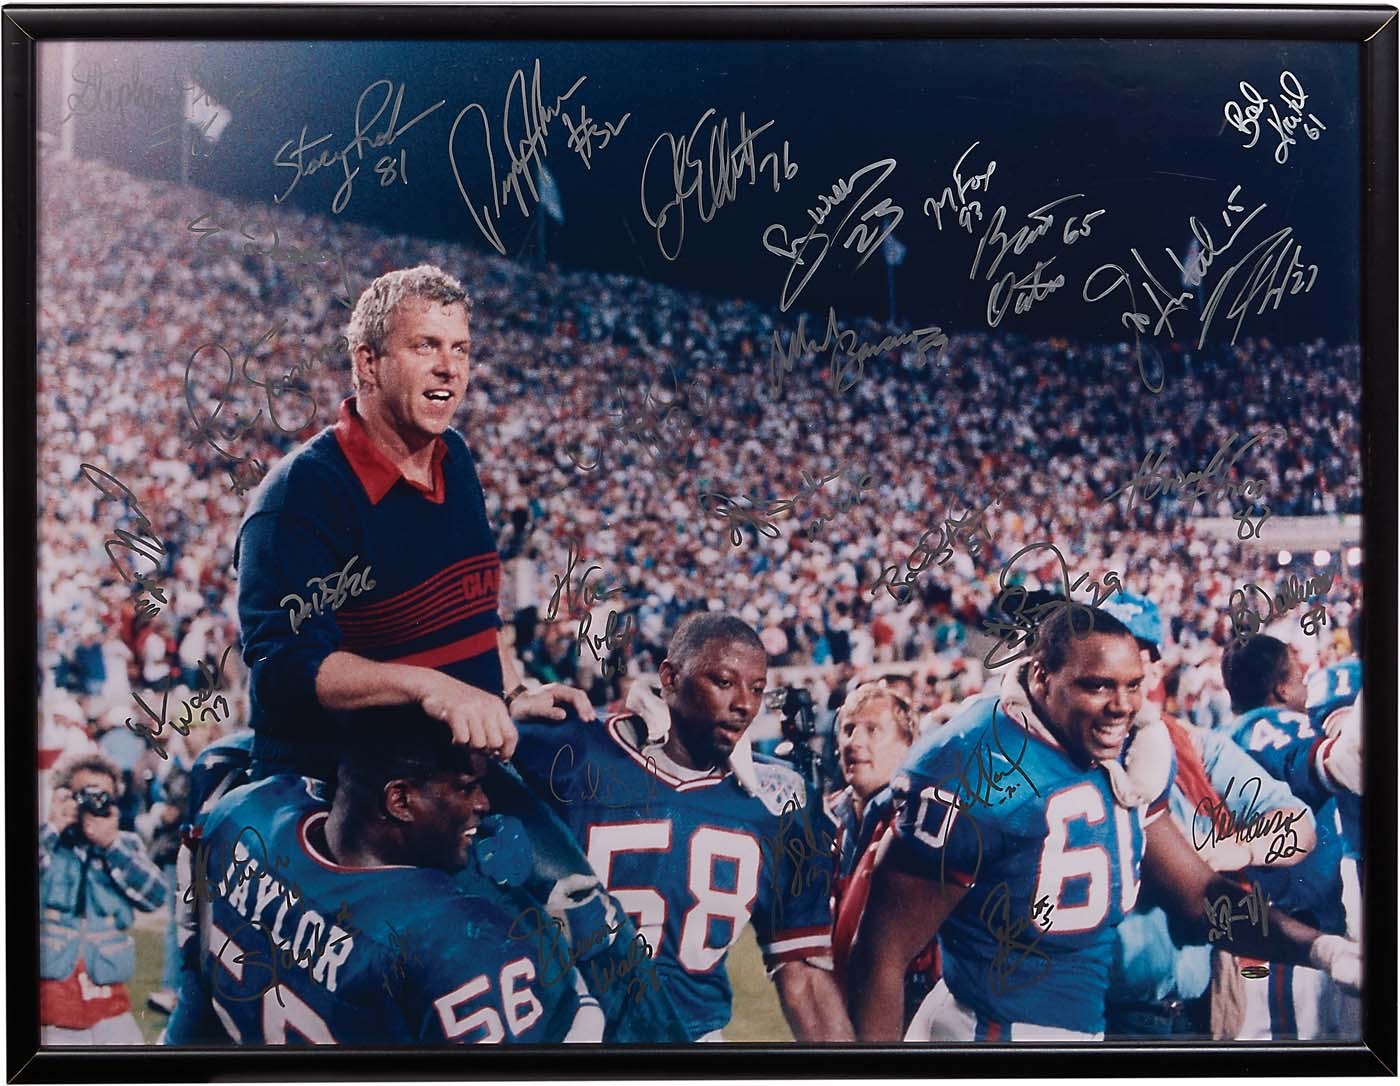 - 1990 Super Bowl Champion NY Giants Team-Signed 30x40" Photo (Steiner)